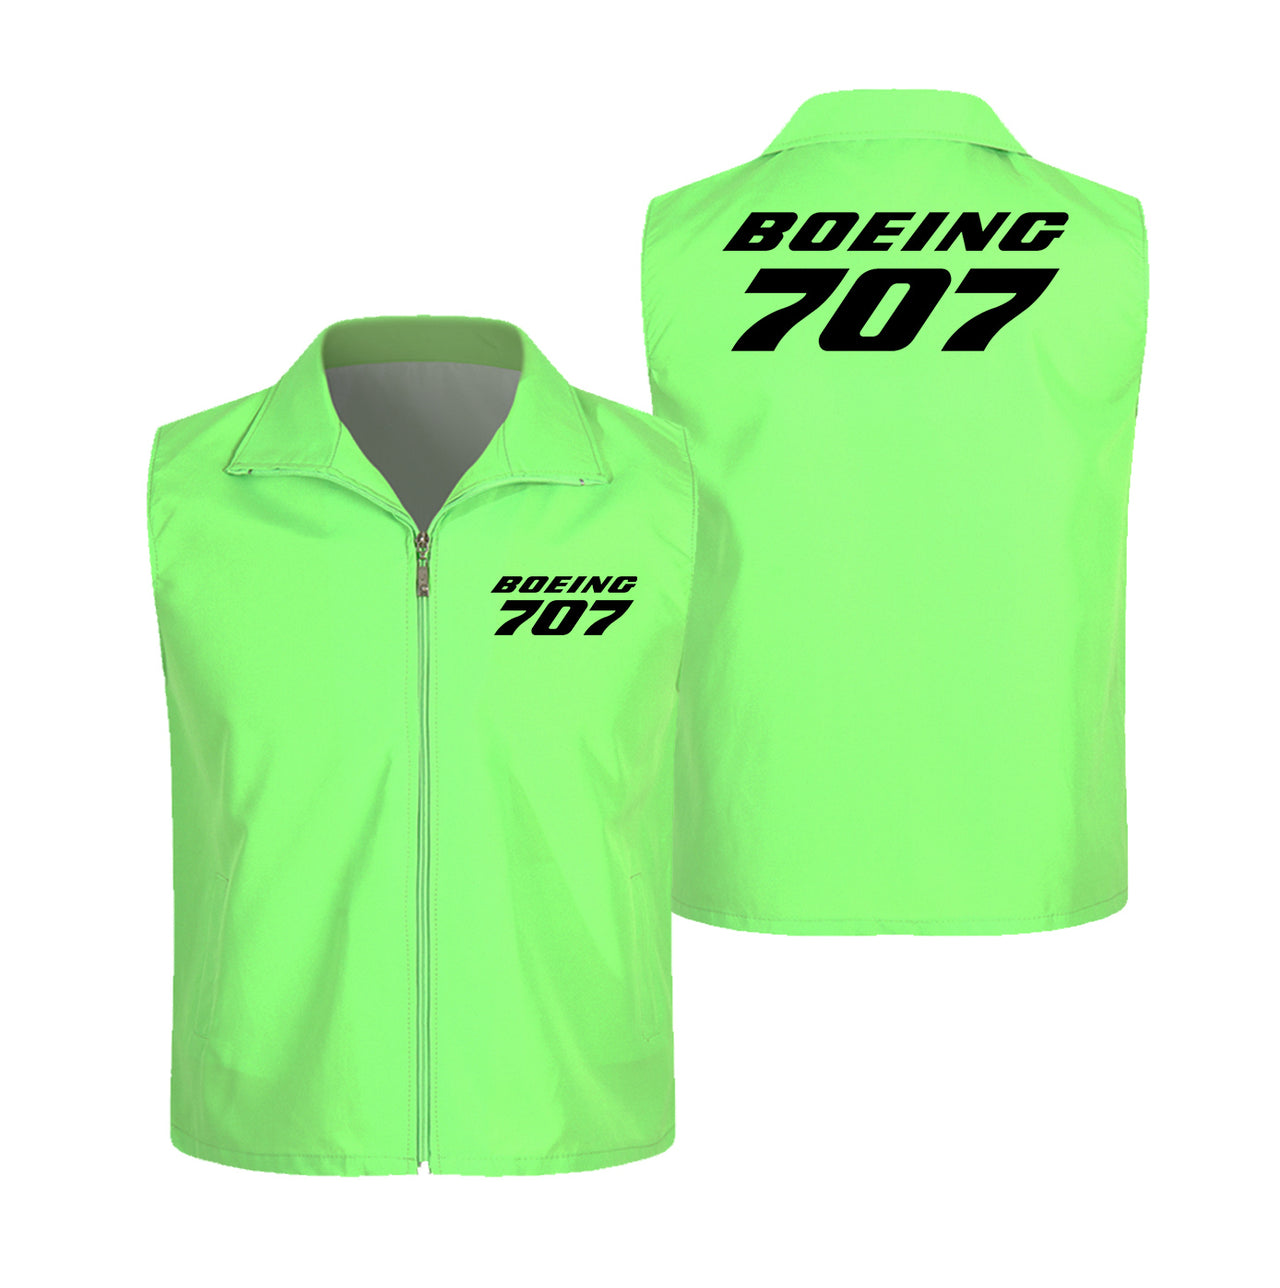 Boeing 707 & Text Designed Thin Style Vests